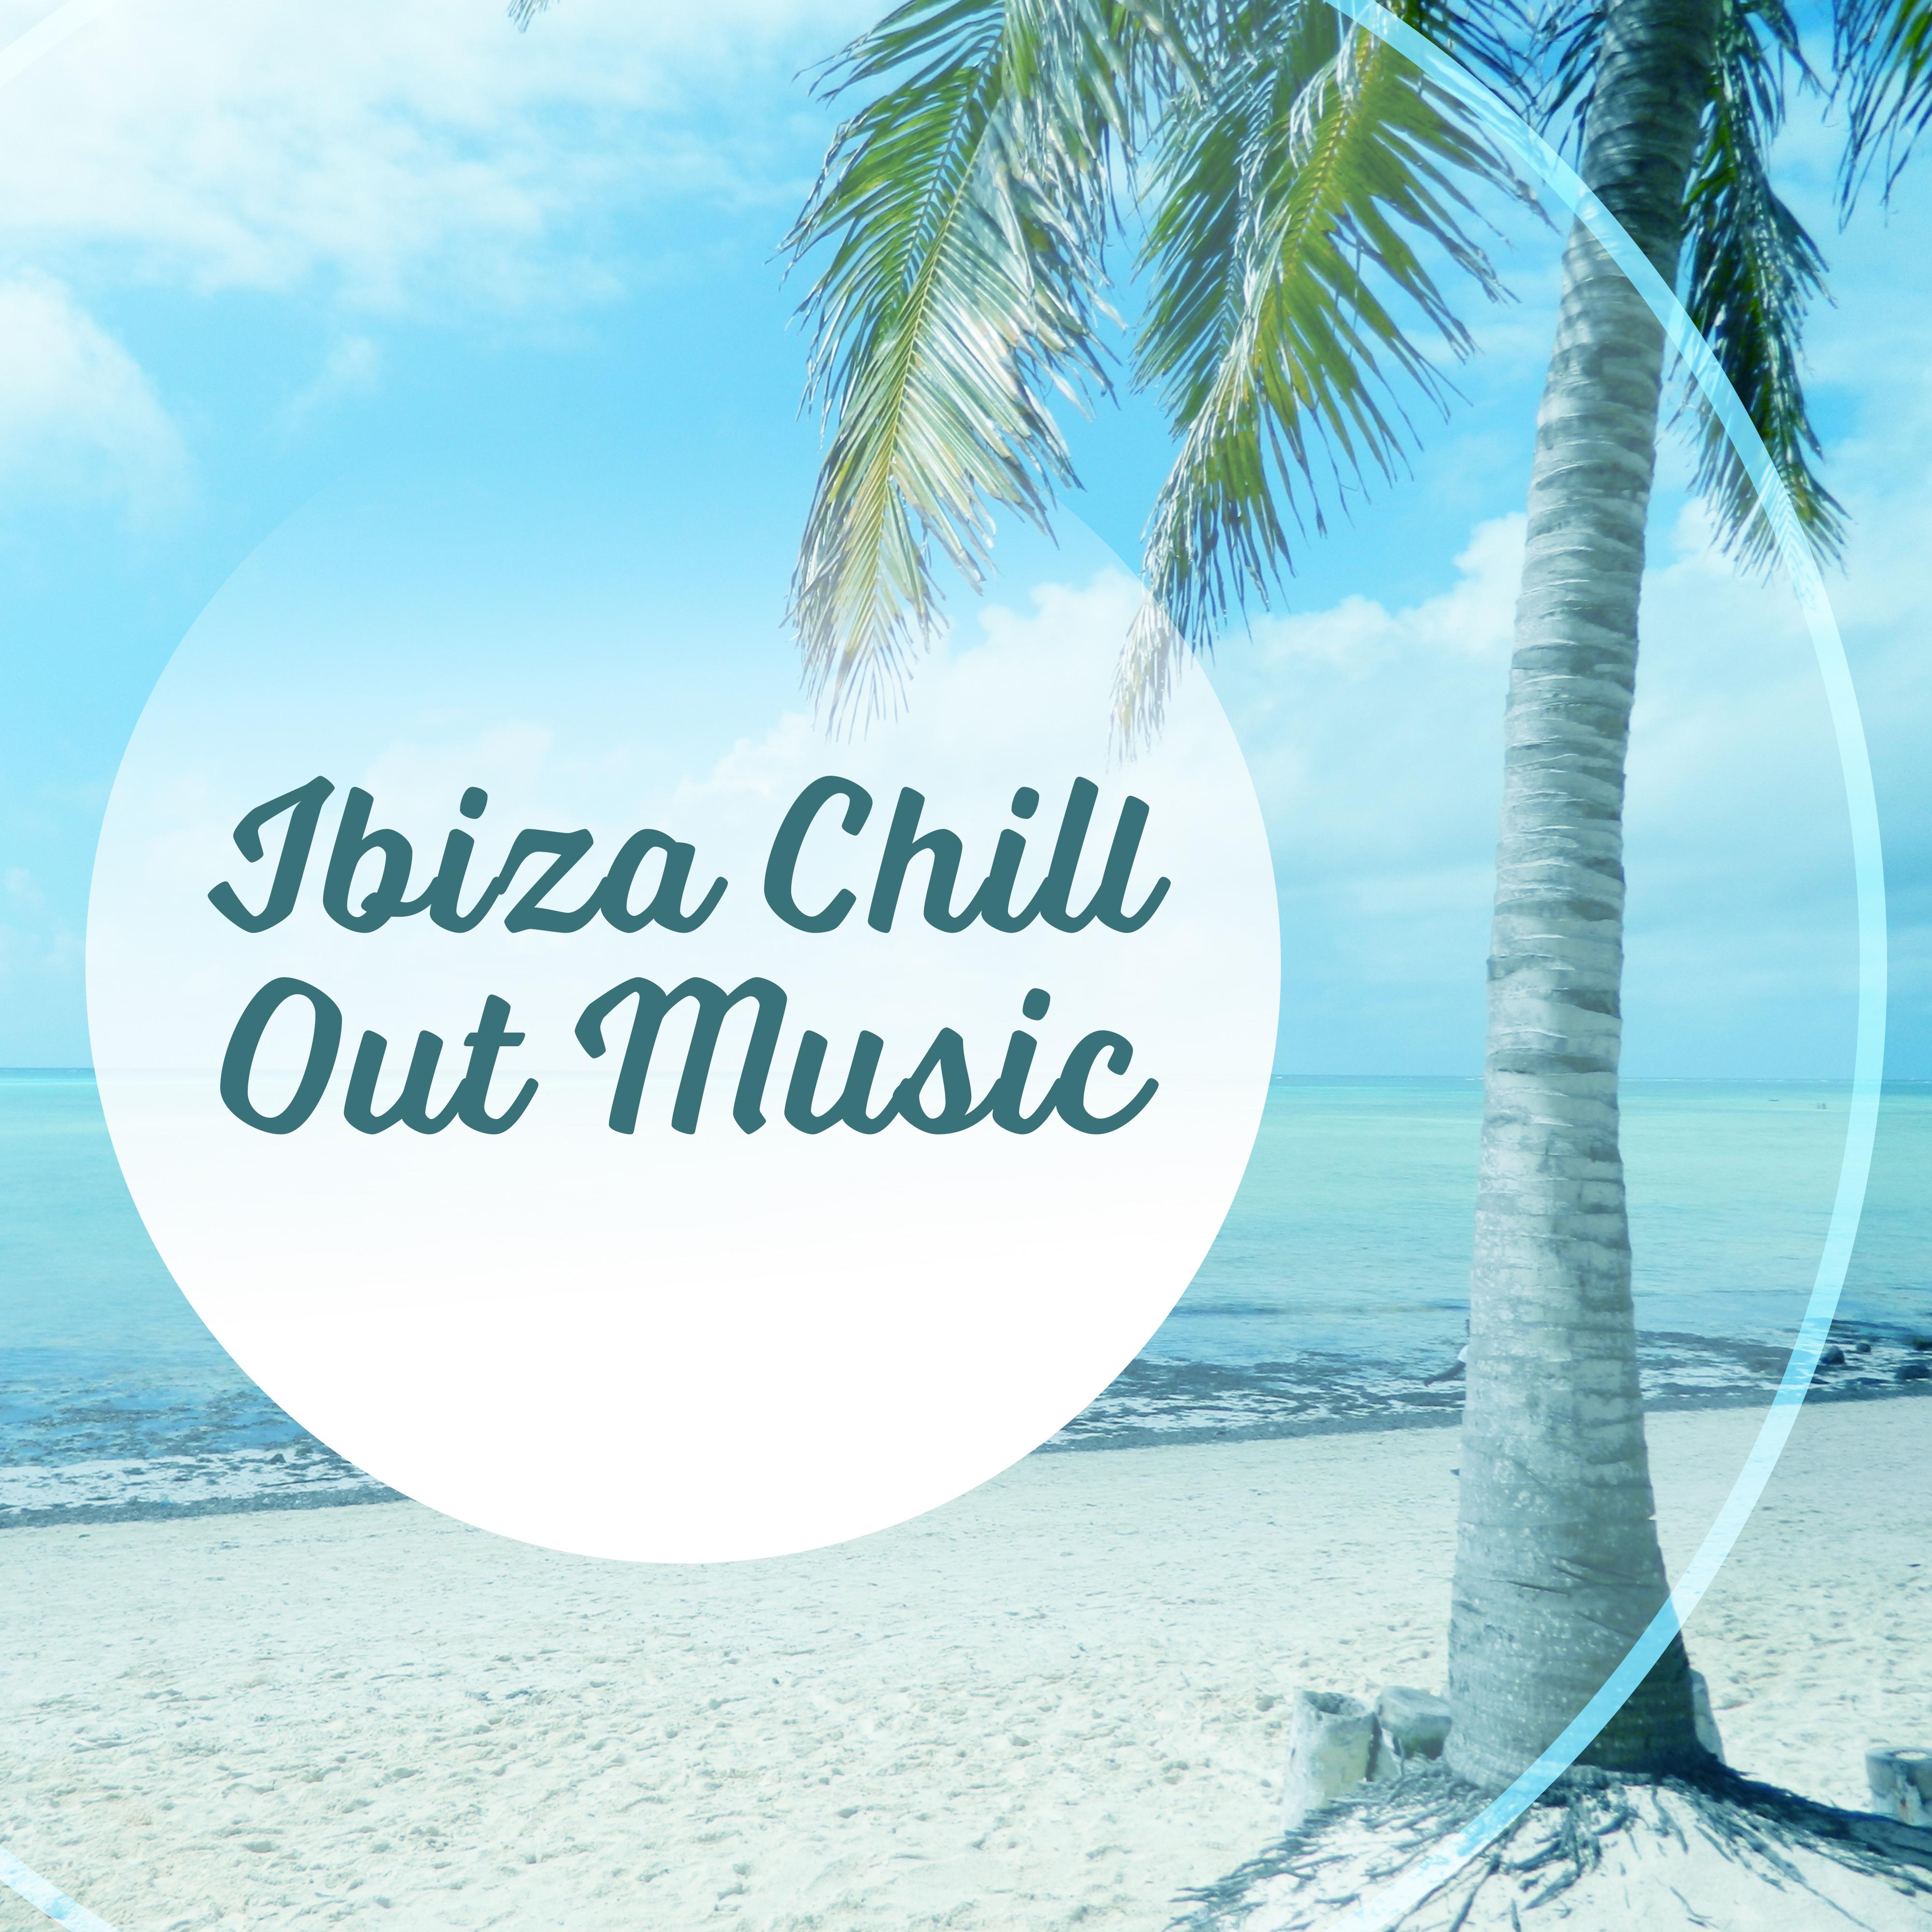 Ibiza Chill Out Music – Calm Music, Ibiza Relaxation, Stress Relief, Chill a Bit